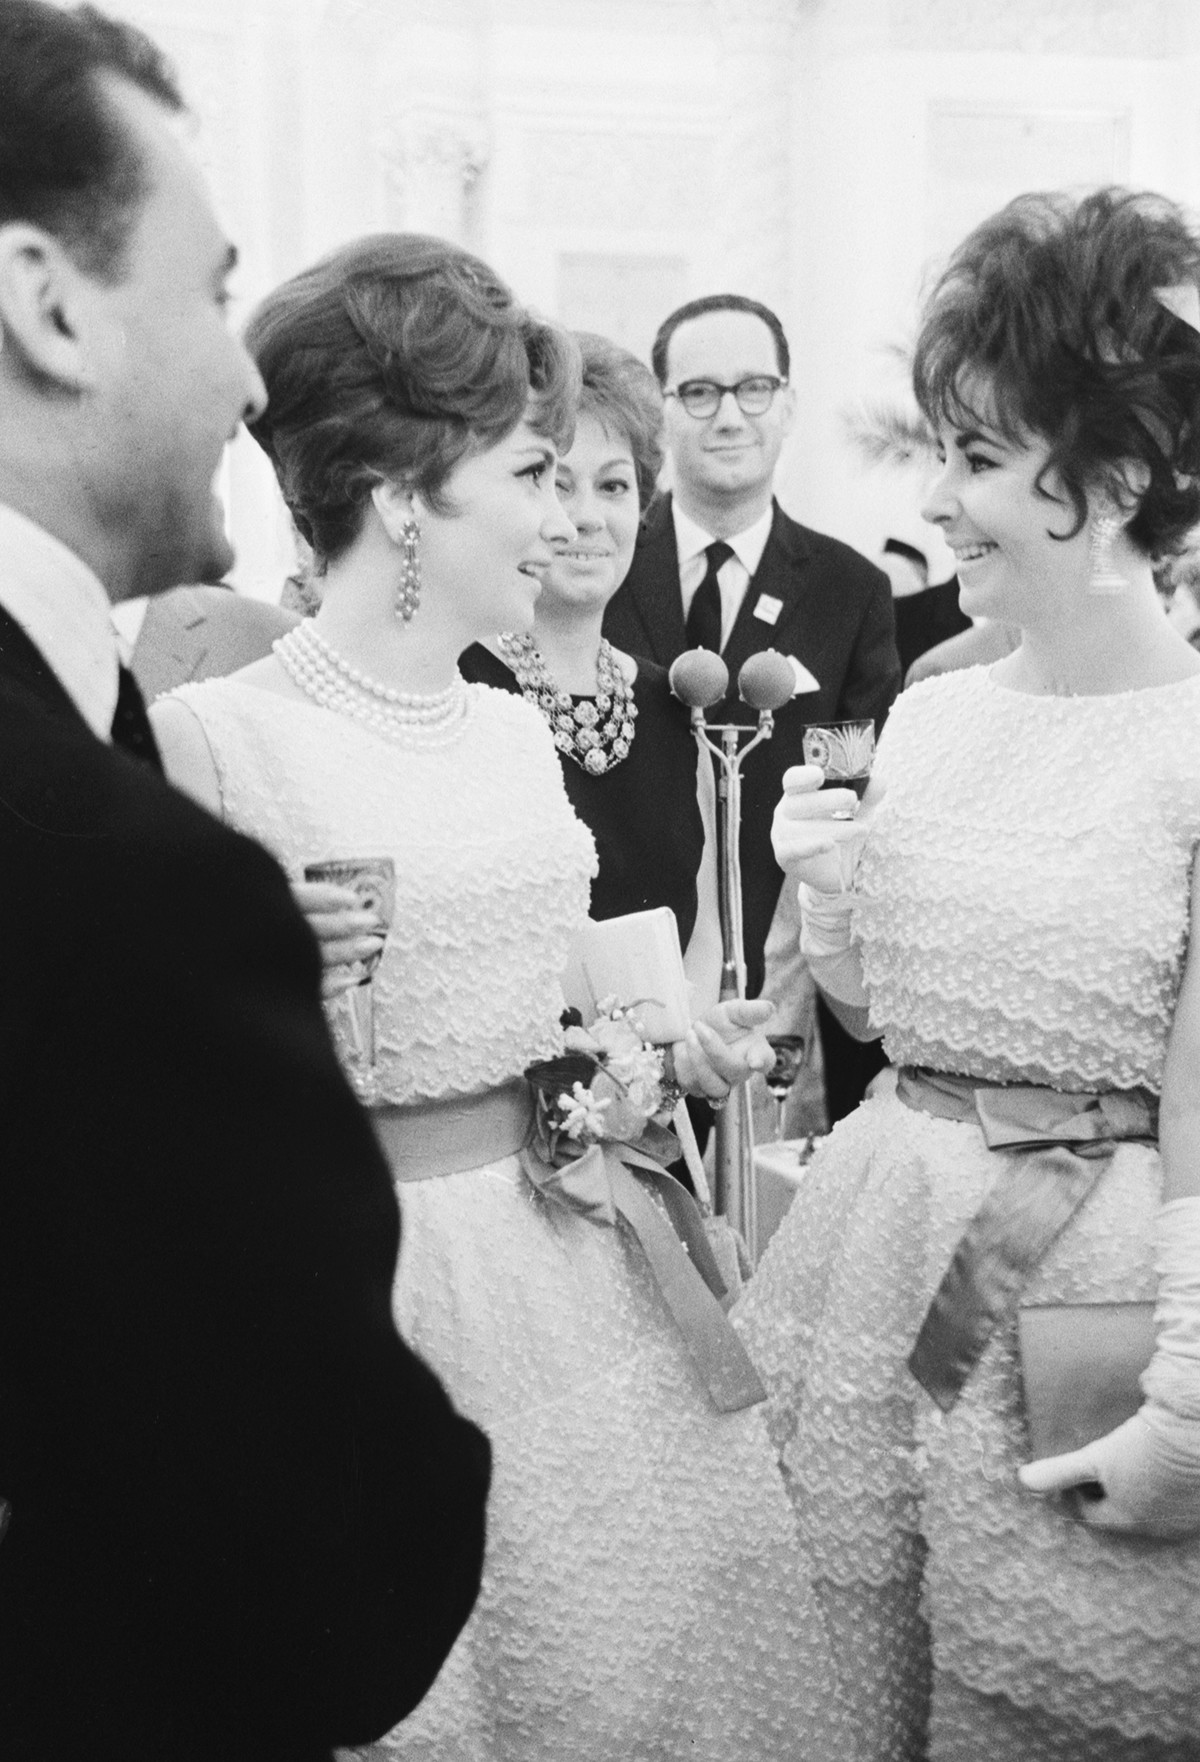 Elizabeth Taylor (R) and Gina Lollobrigida during a reception in the Grand Kremlin Palace at the 2nd Moscow International Film Festival, 1961